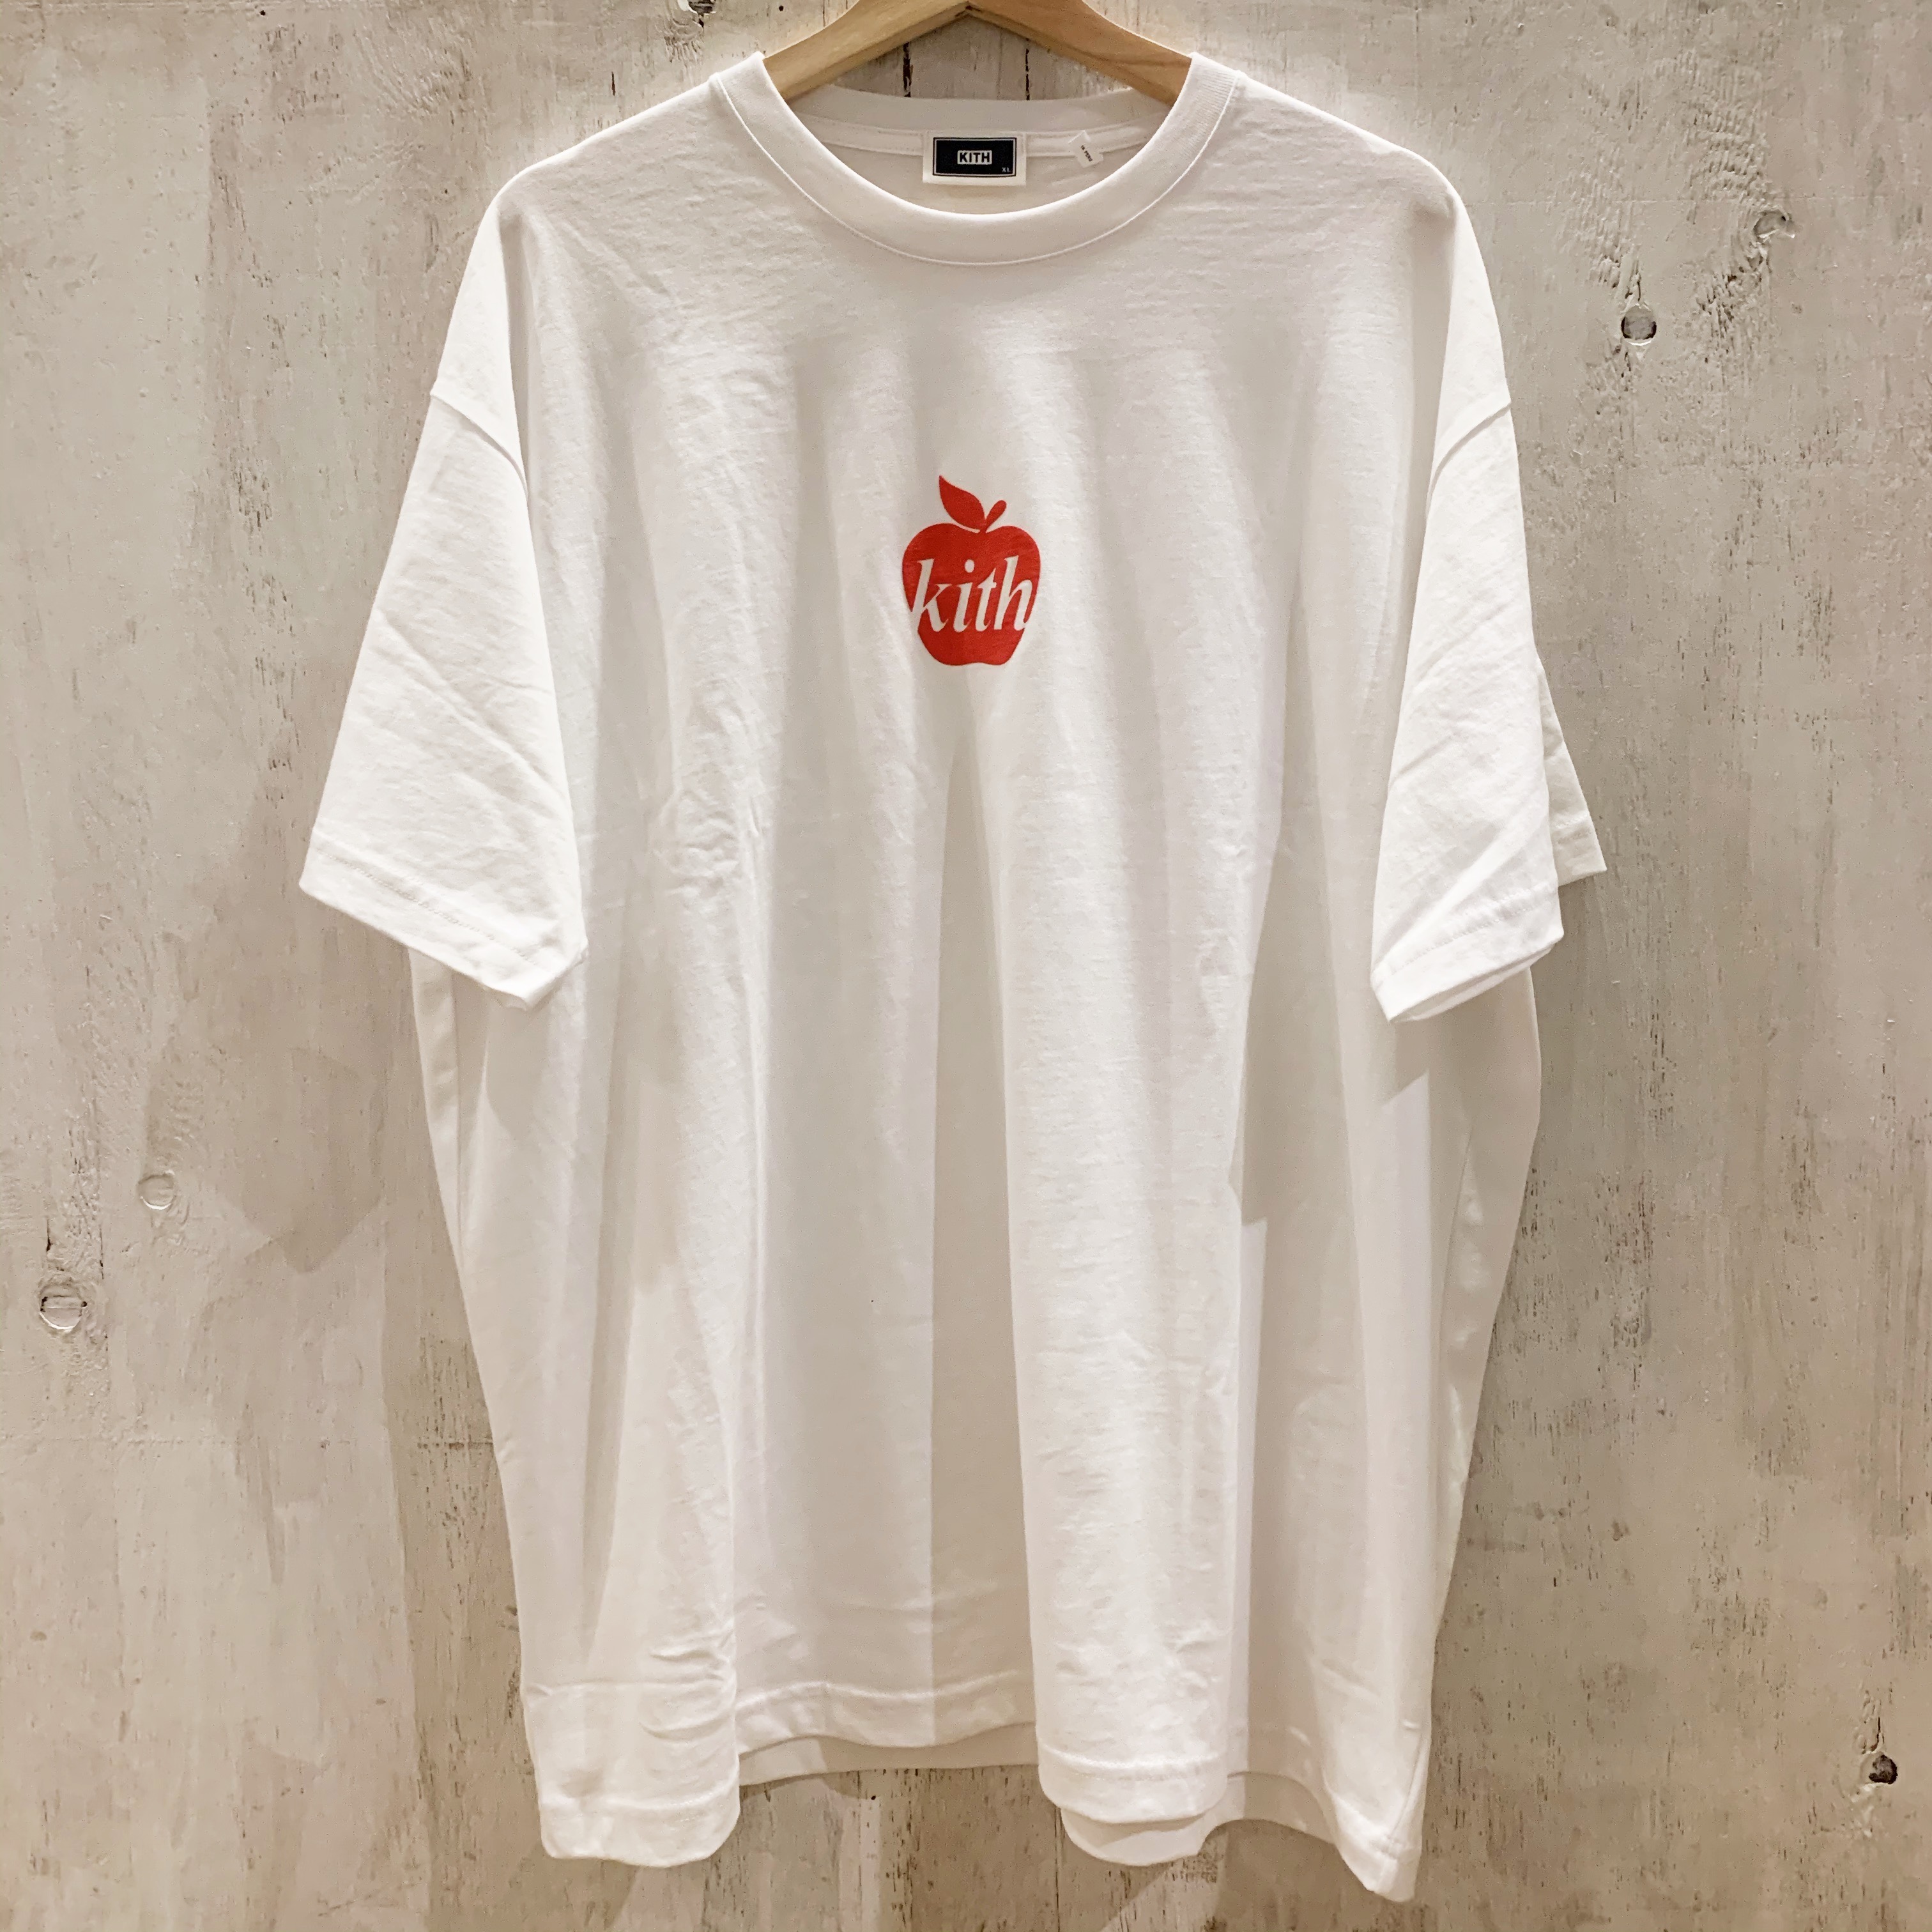 KITH EMPIRE STATE TEE